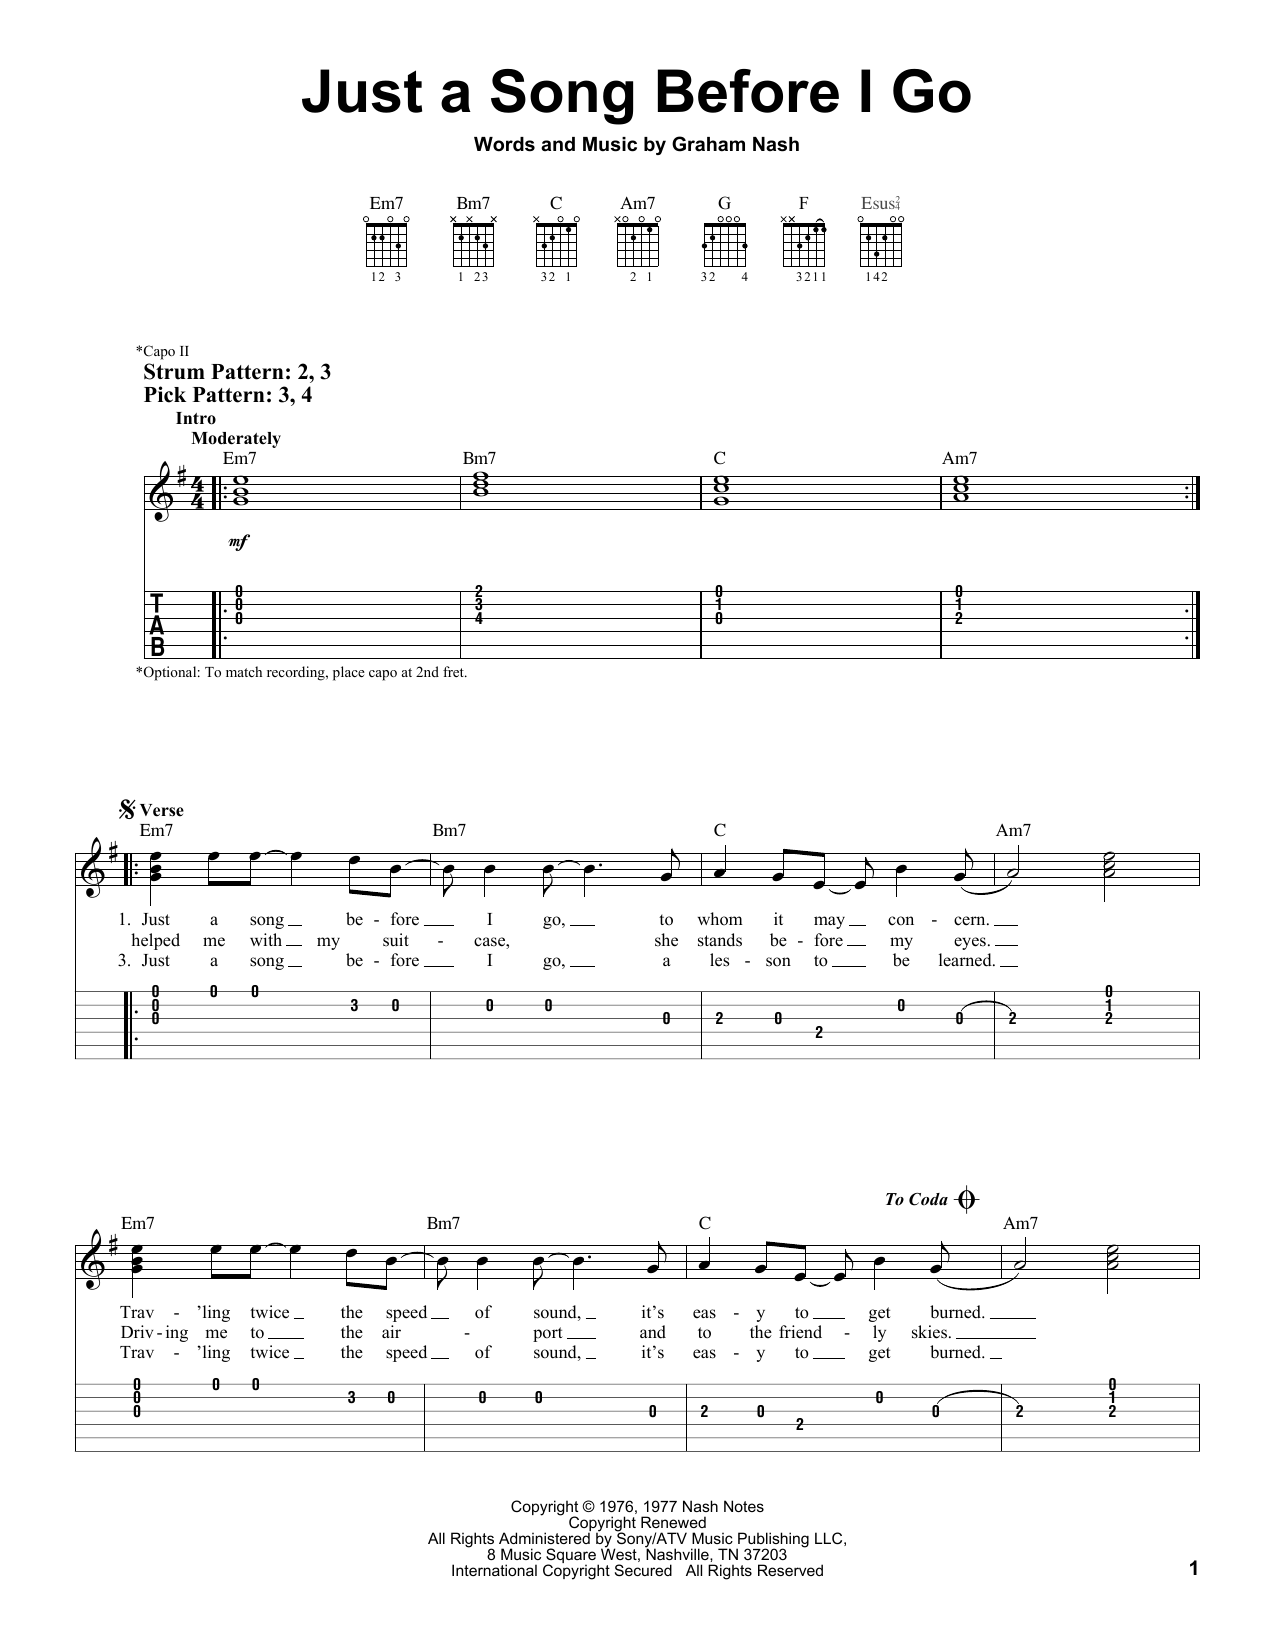 Download Crosby, Stills & Nash Just A Song Before I Go Sheet Music